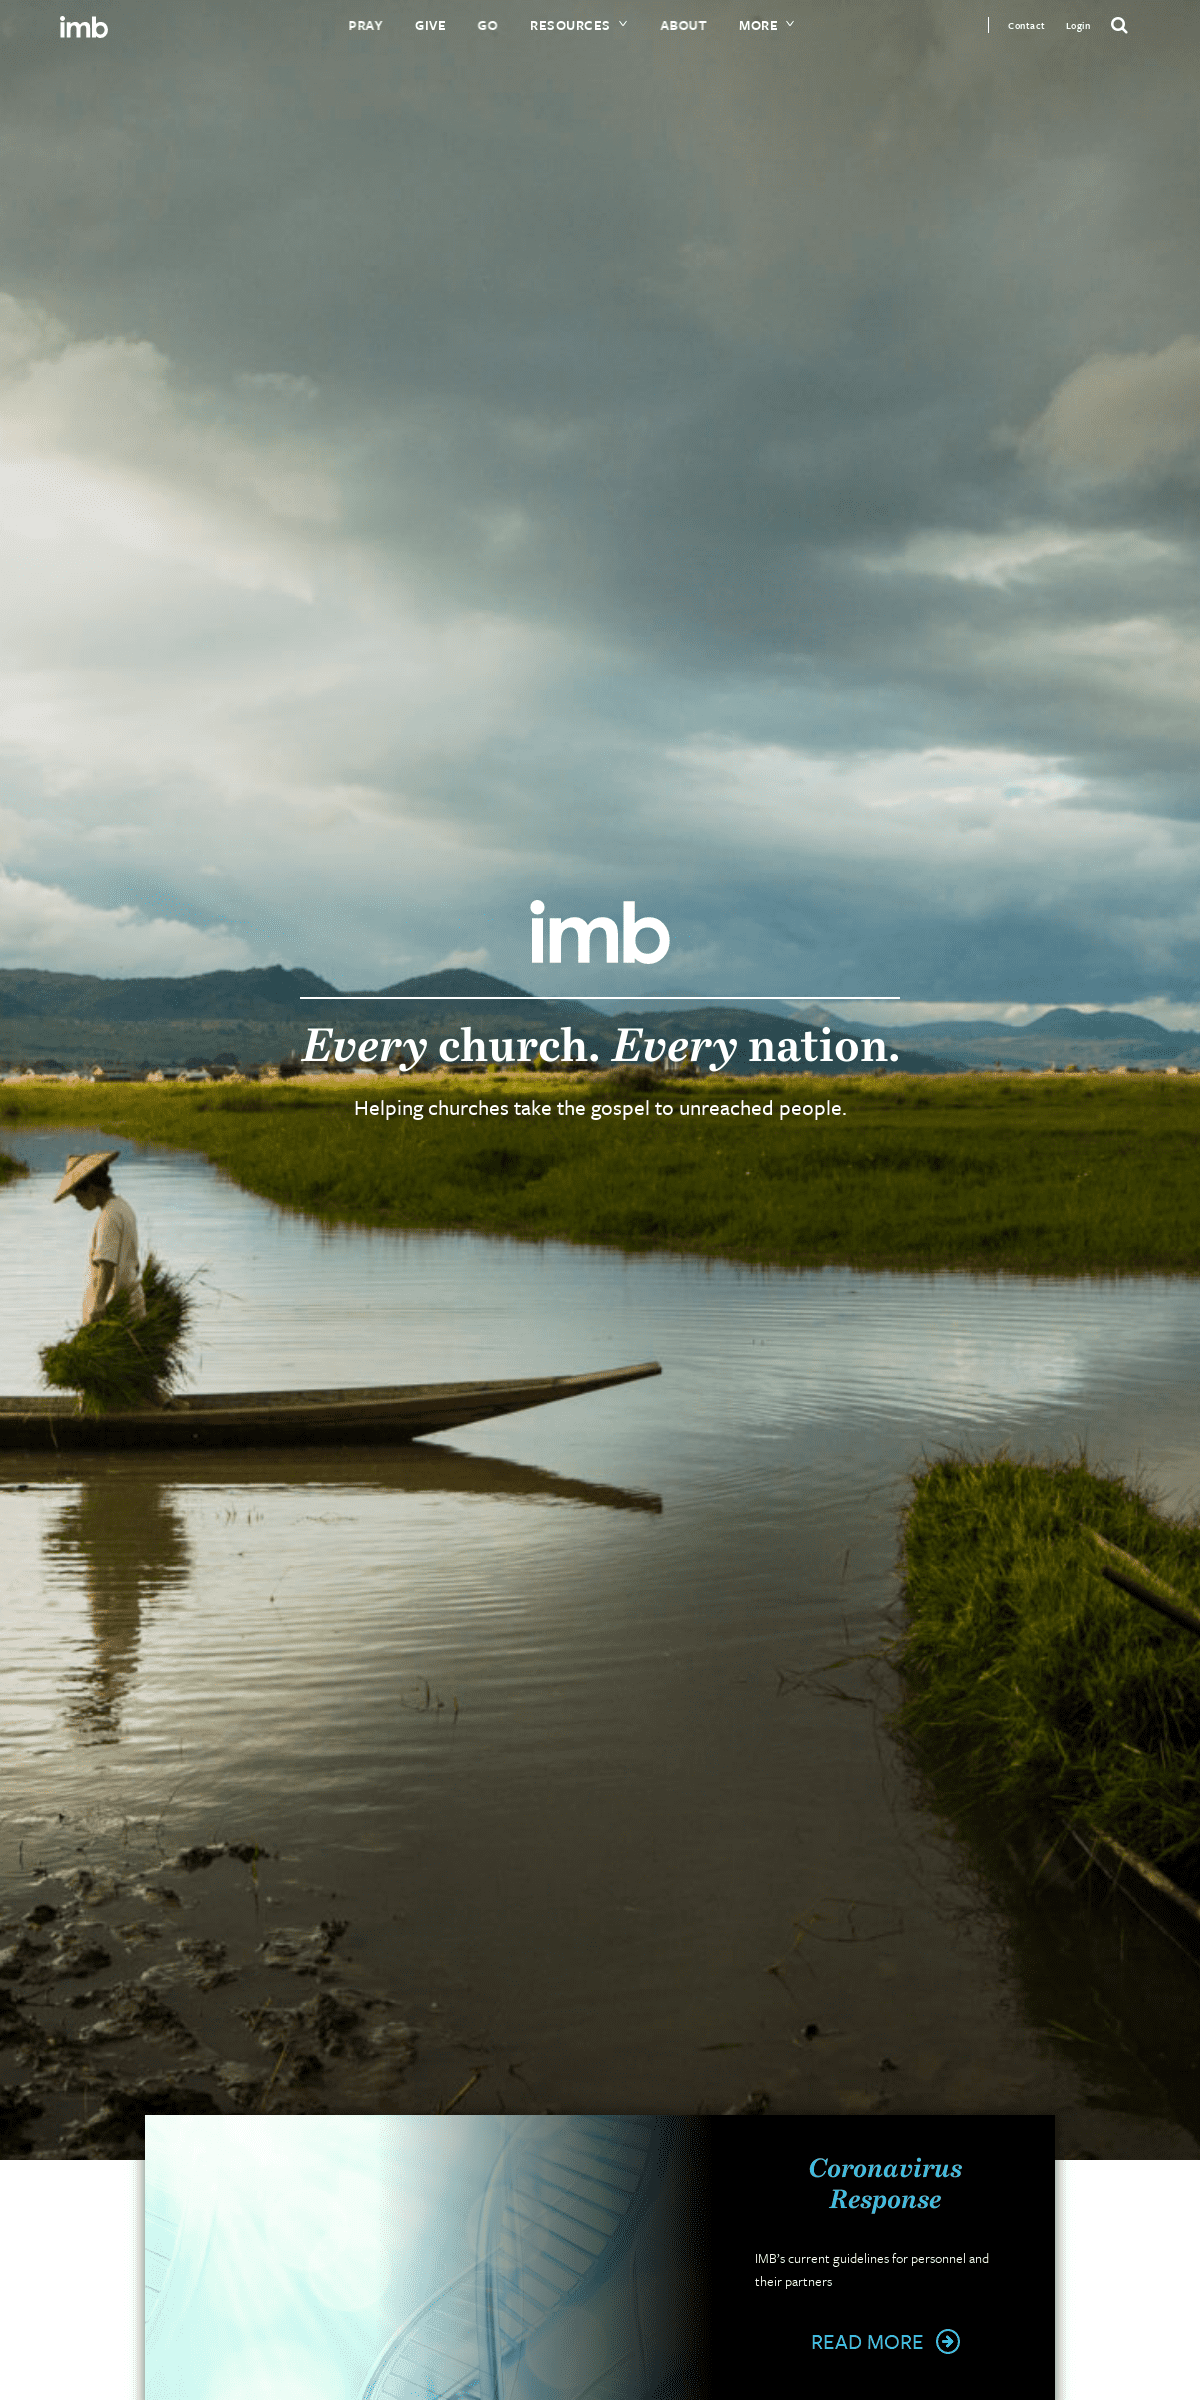 A complete backup of imb.org